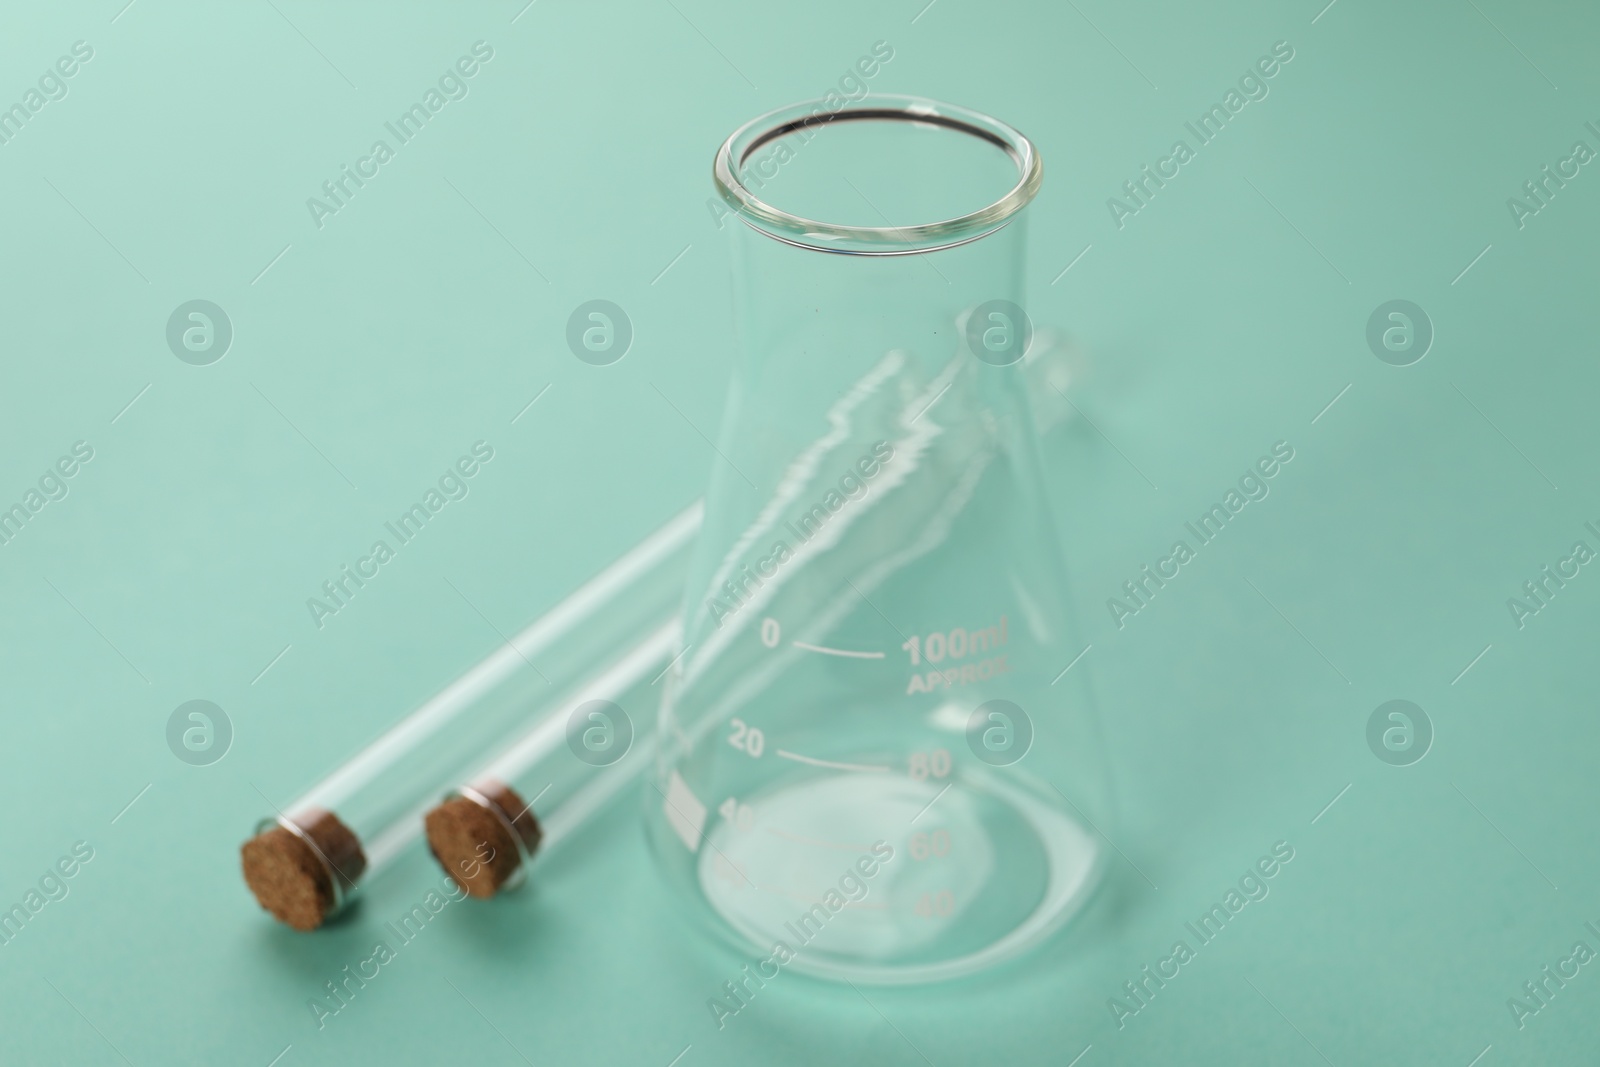 Photo of Flask and test tubes on turquoise background. Laboratory glassware